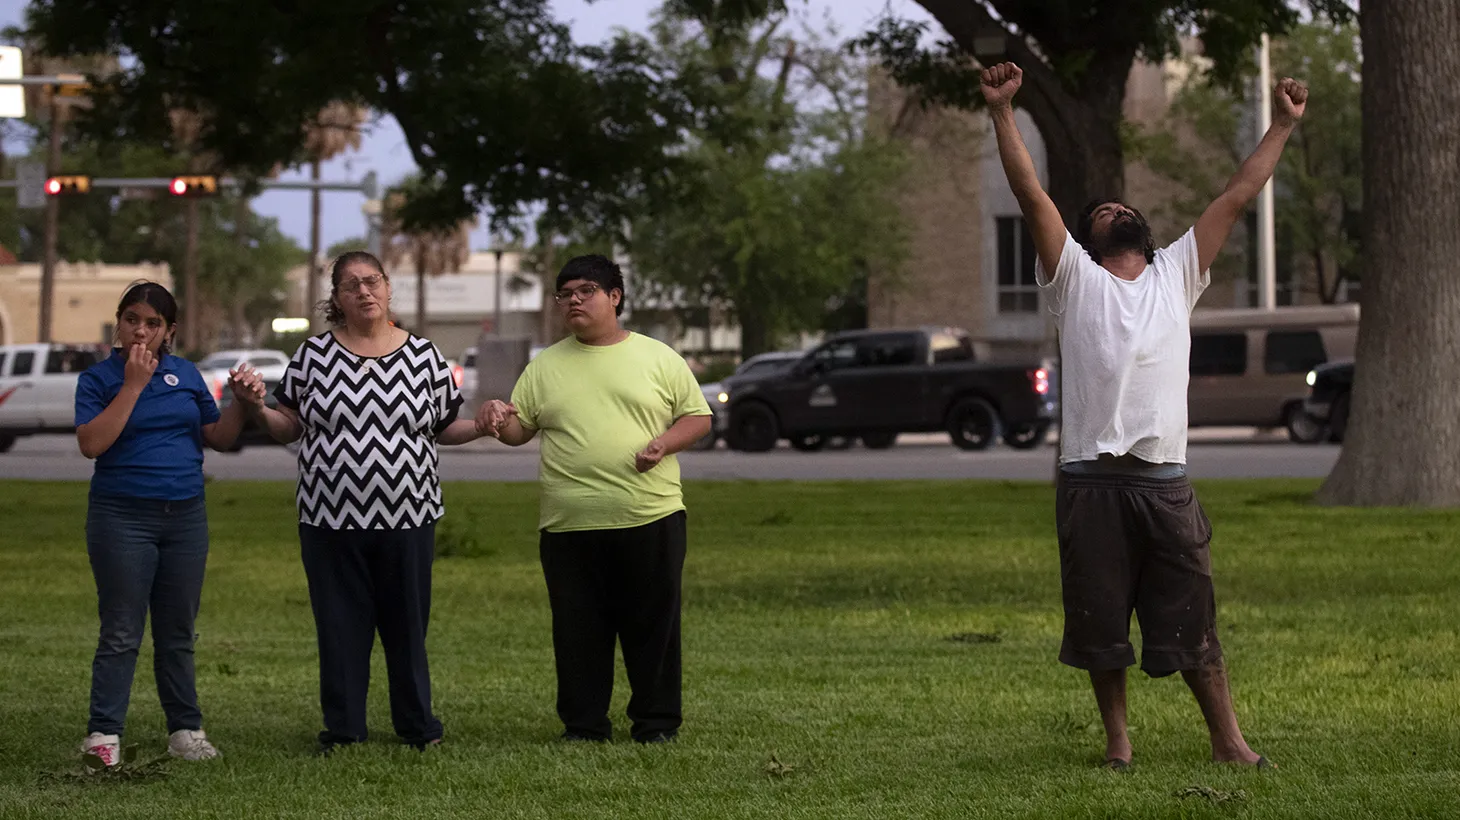 Community members gather in prayer at the Uvalde downtown plaza following the shooting at Robb Elementary School in Uvalde, Texas on May 24, 2022.